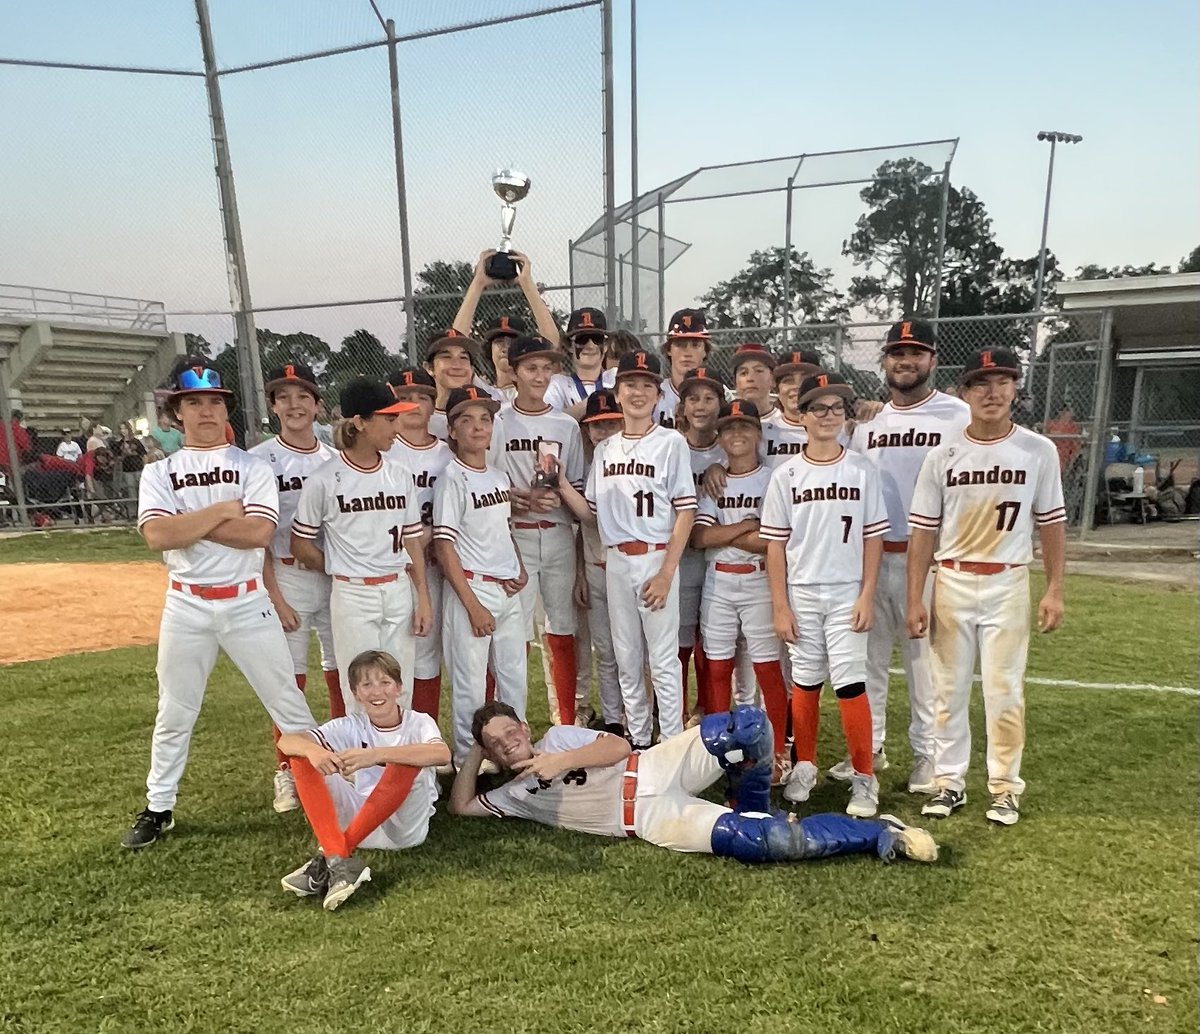 Here is this year‘s @DuvalSchools middle school City Baseball ⚾️ Champions 🏆from @jlcpathletics Way to Go Lions 🦁